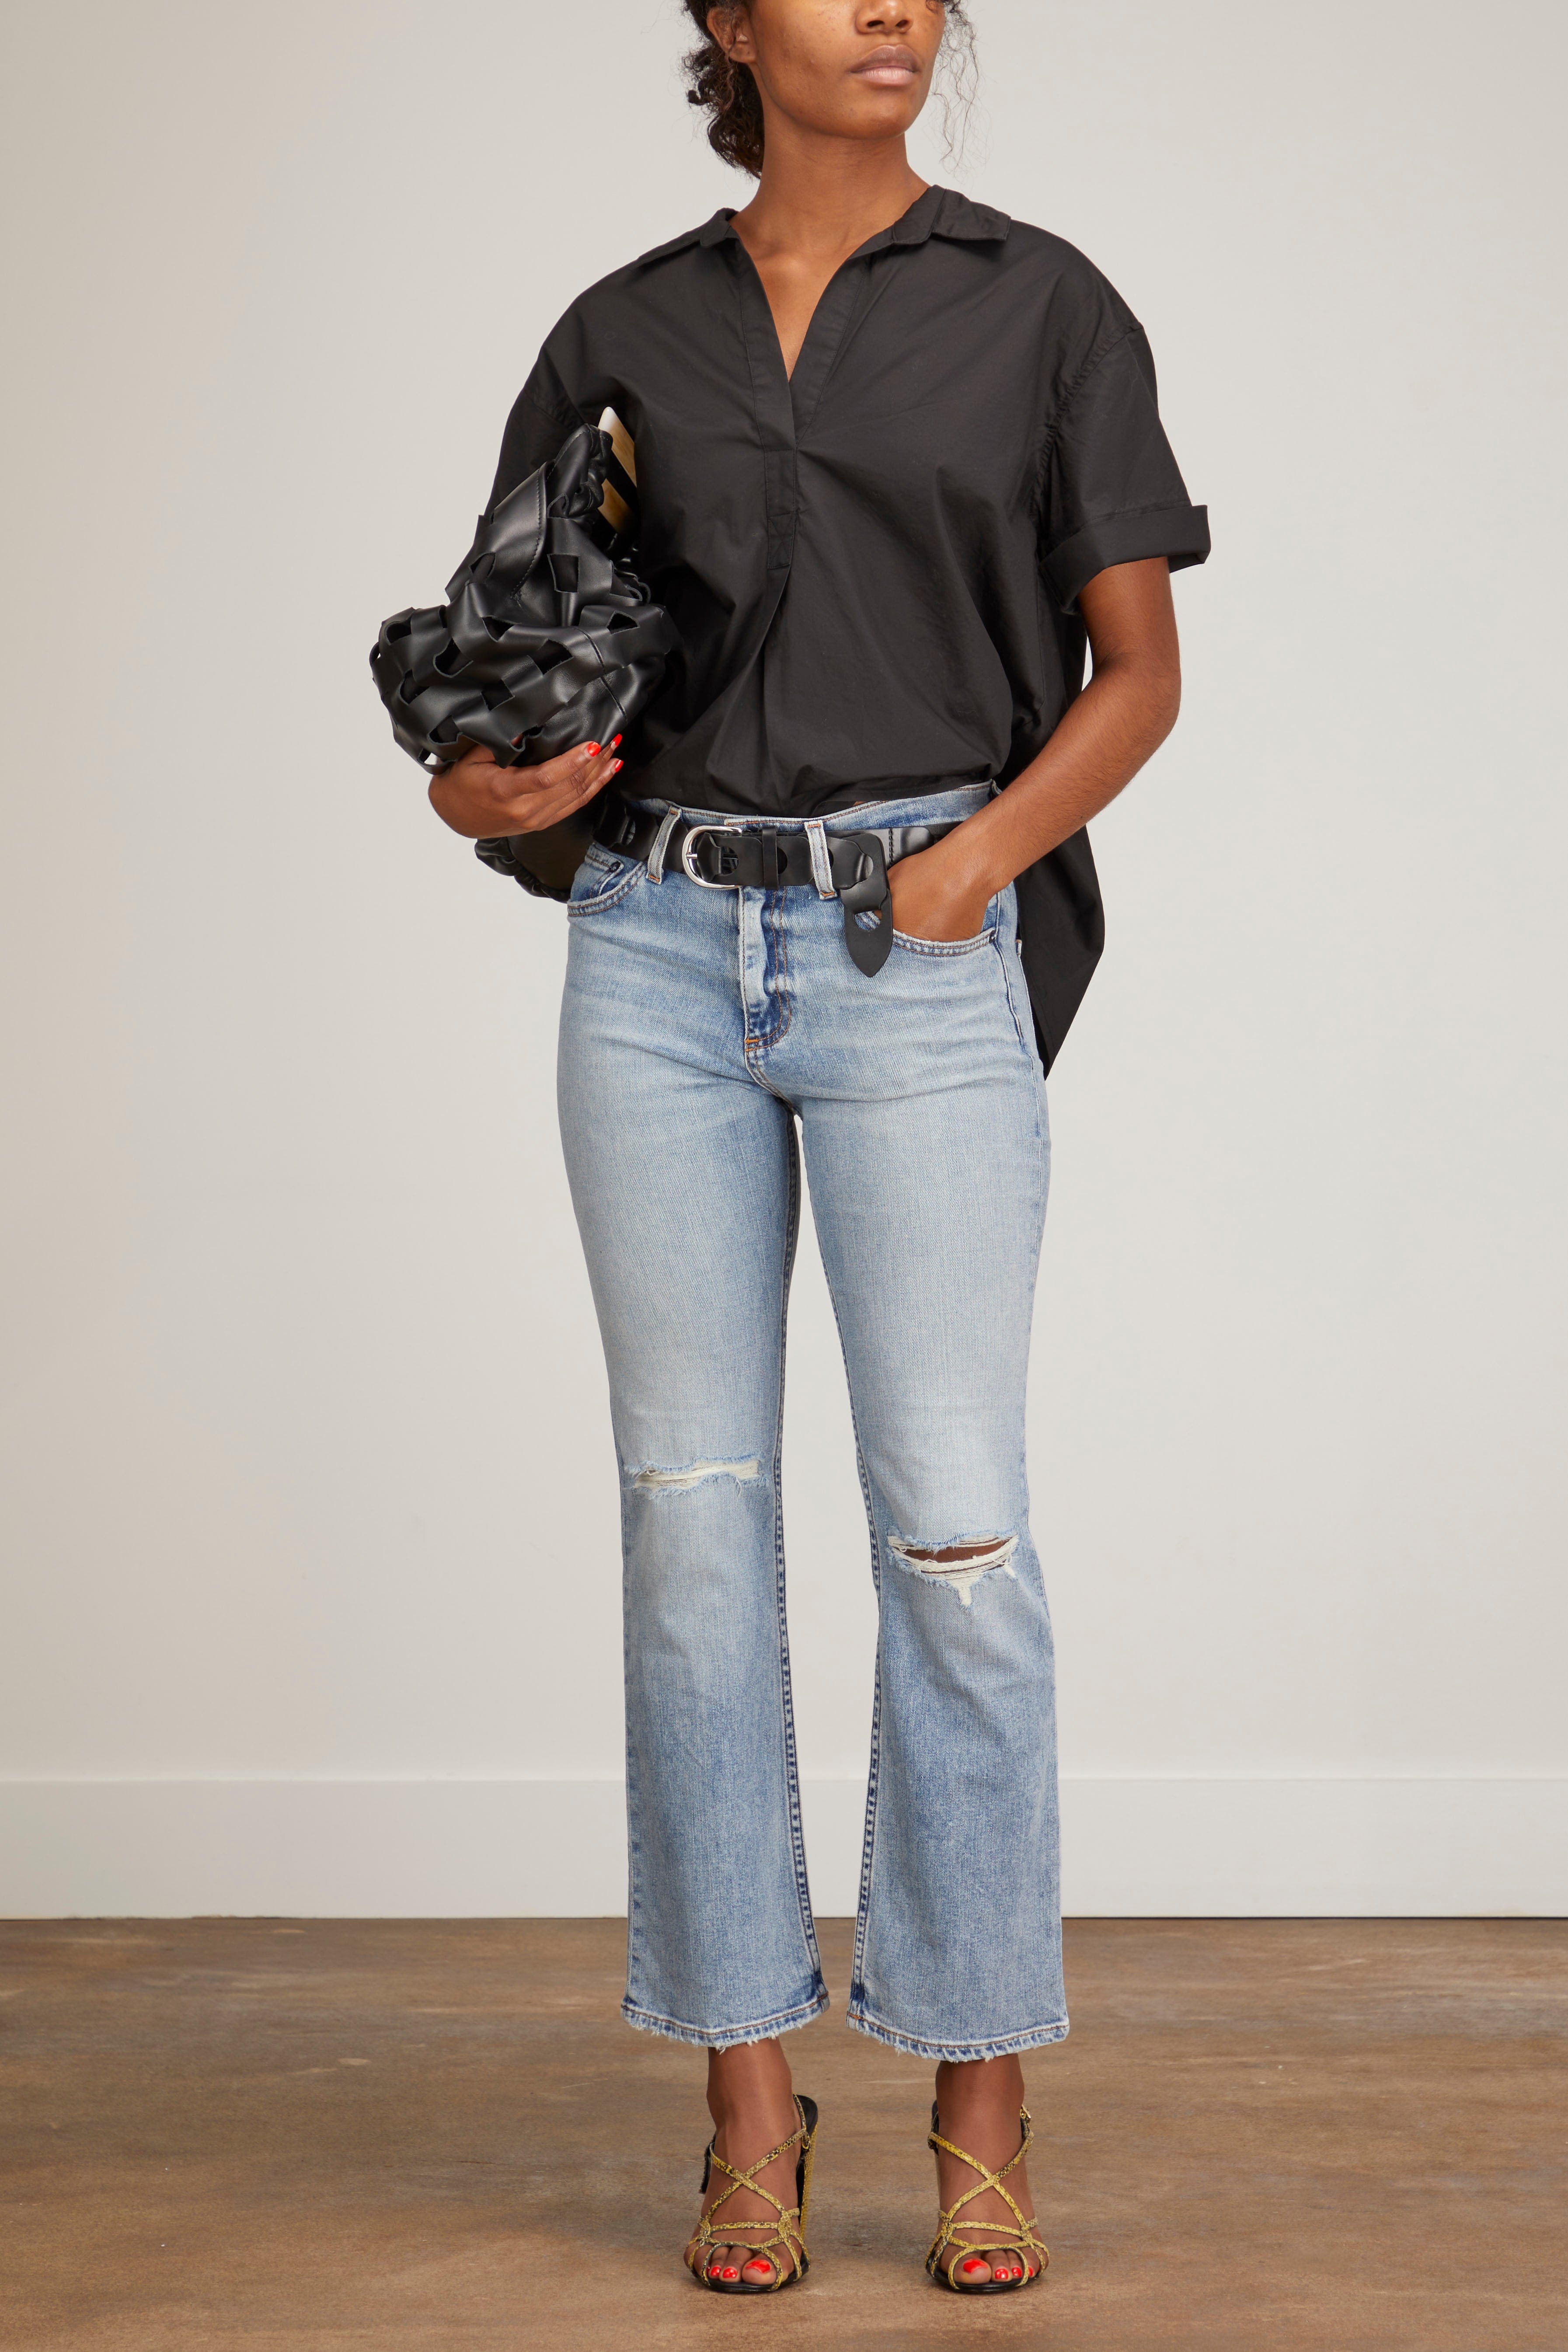 Askk NY Jeans High Rise Crop Boot Jean in Montauk Askk NY High Rise Crop Boot Jean in Montauk